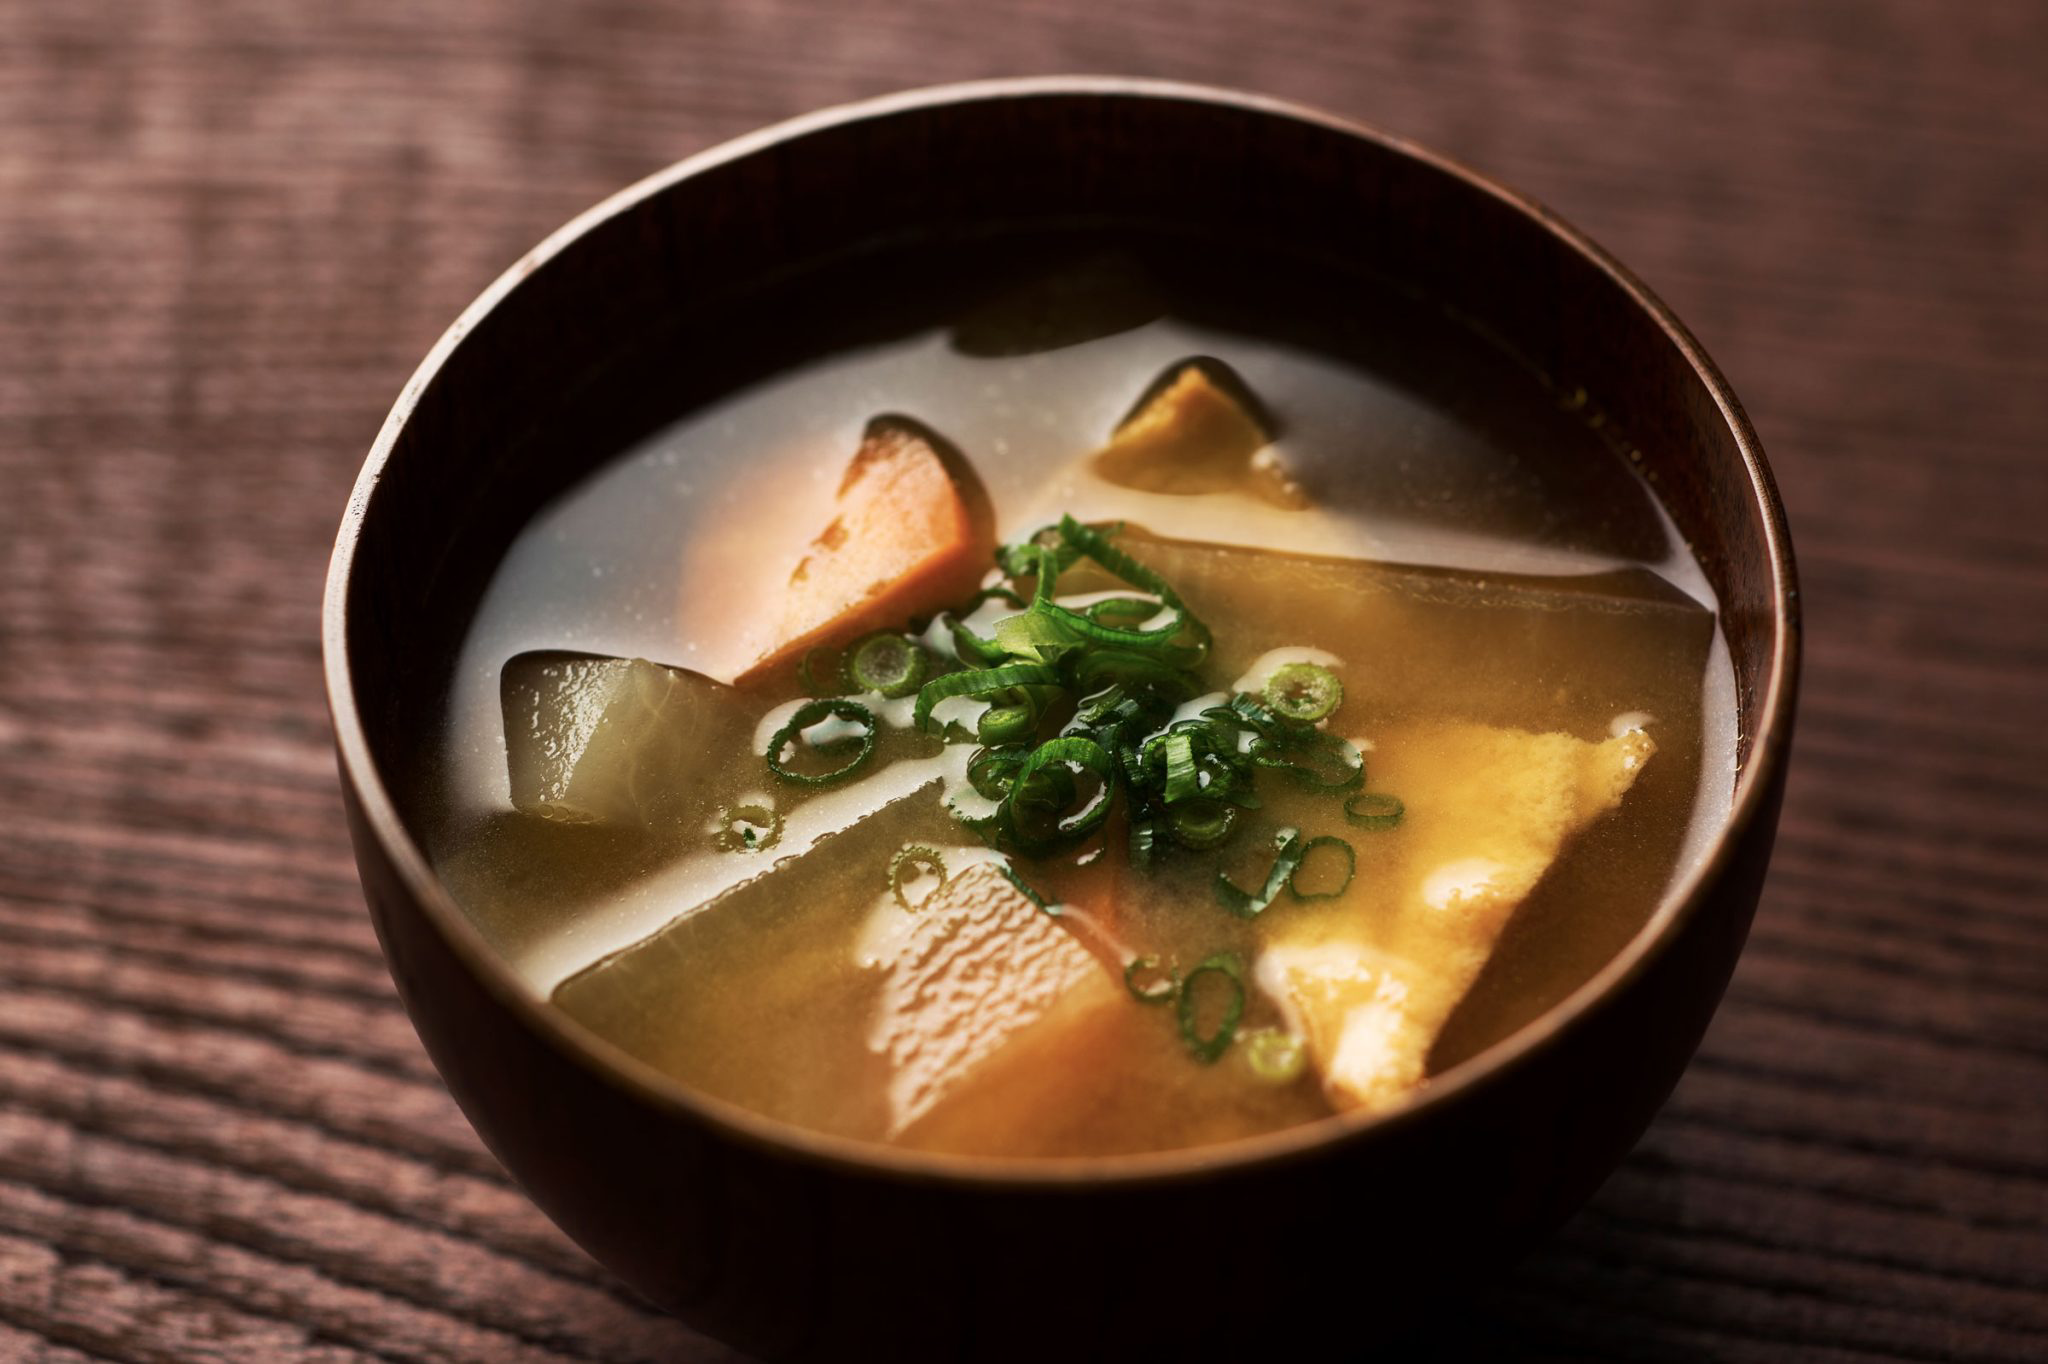 A wooden bowl filled with miso soup made with green tea.